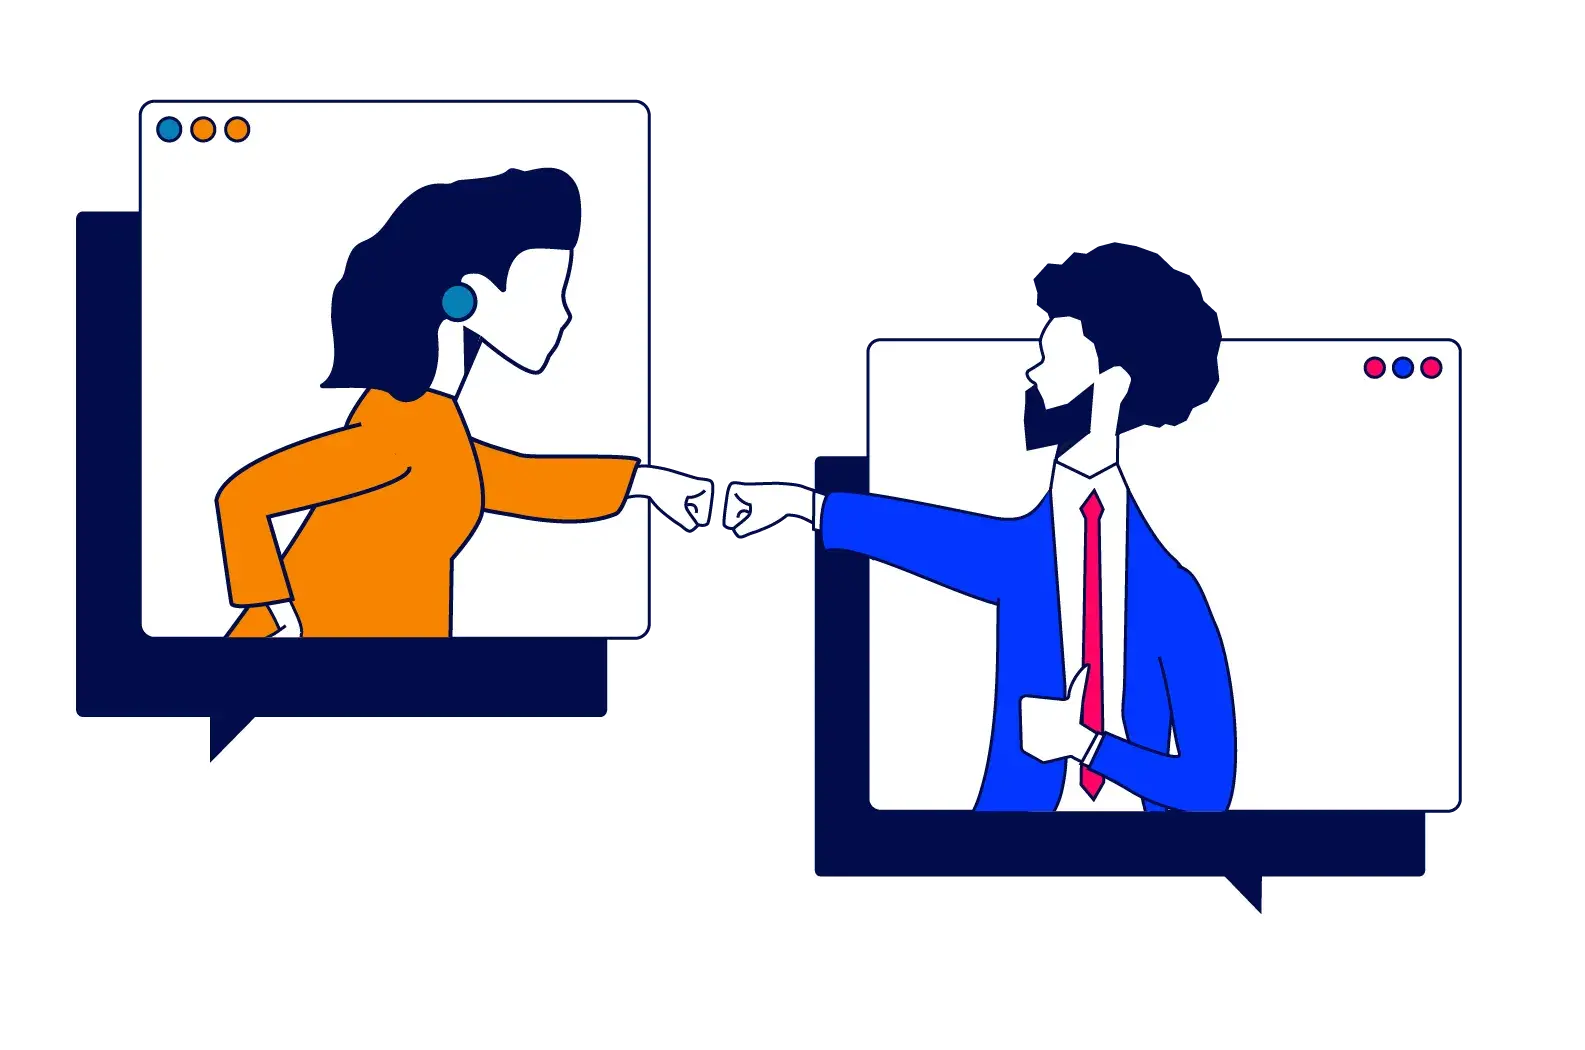 A colorful graphic of a woman in orange fist bumping a man in a suit